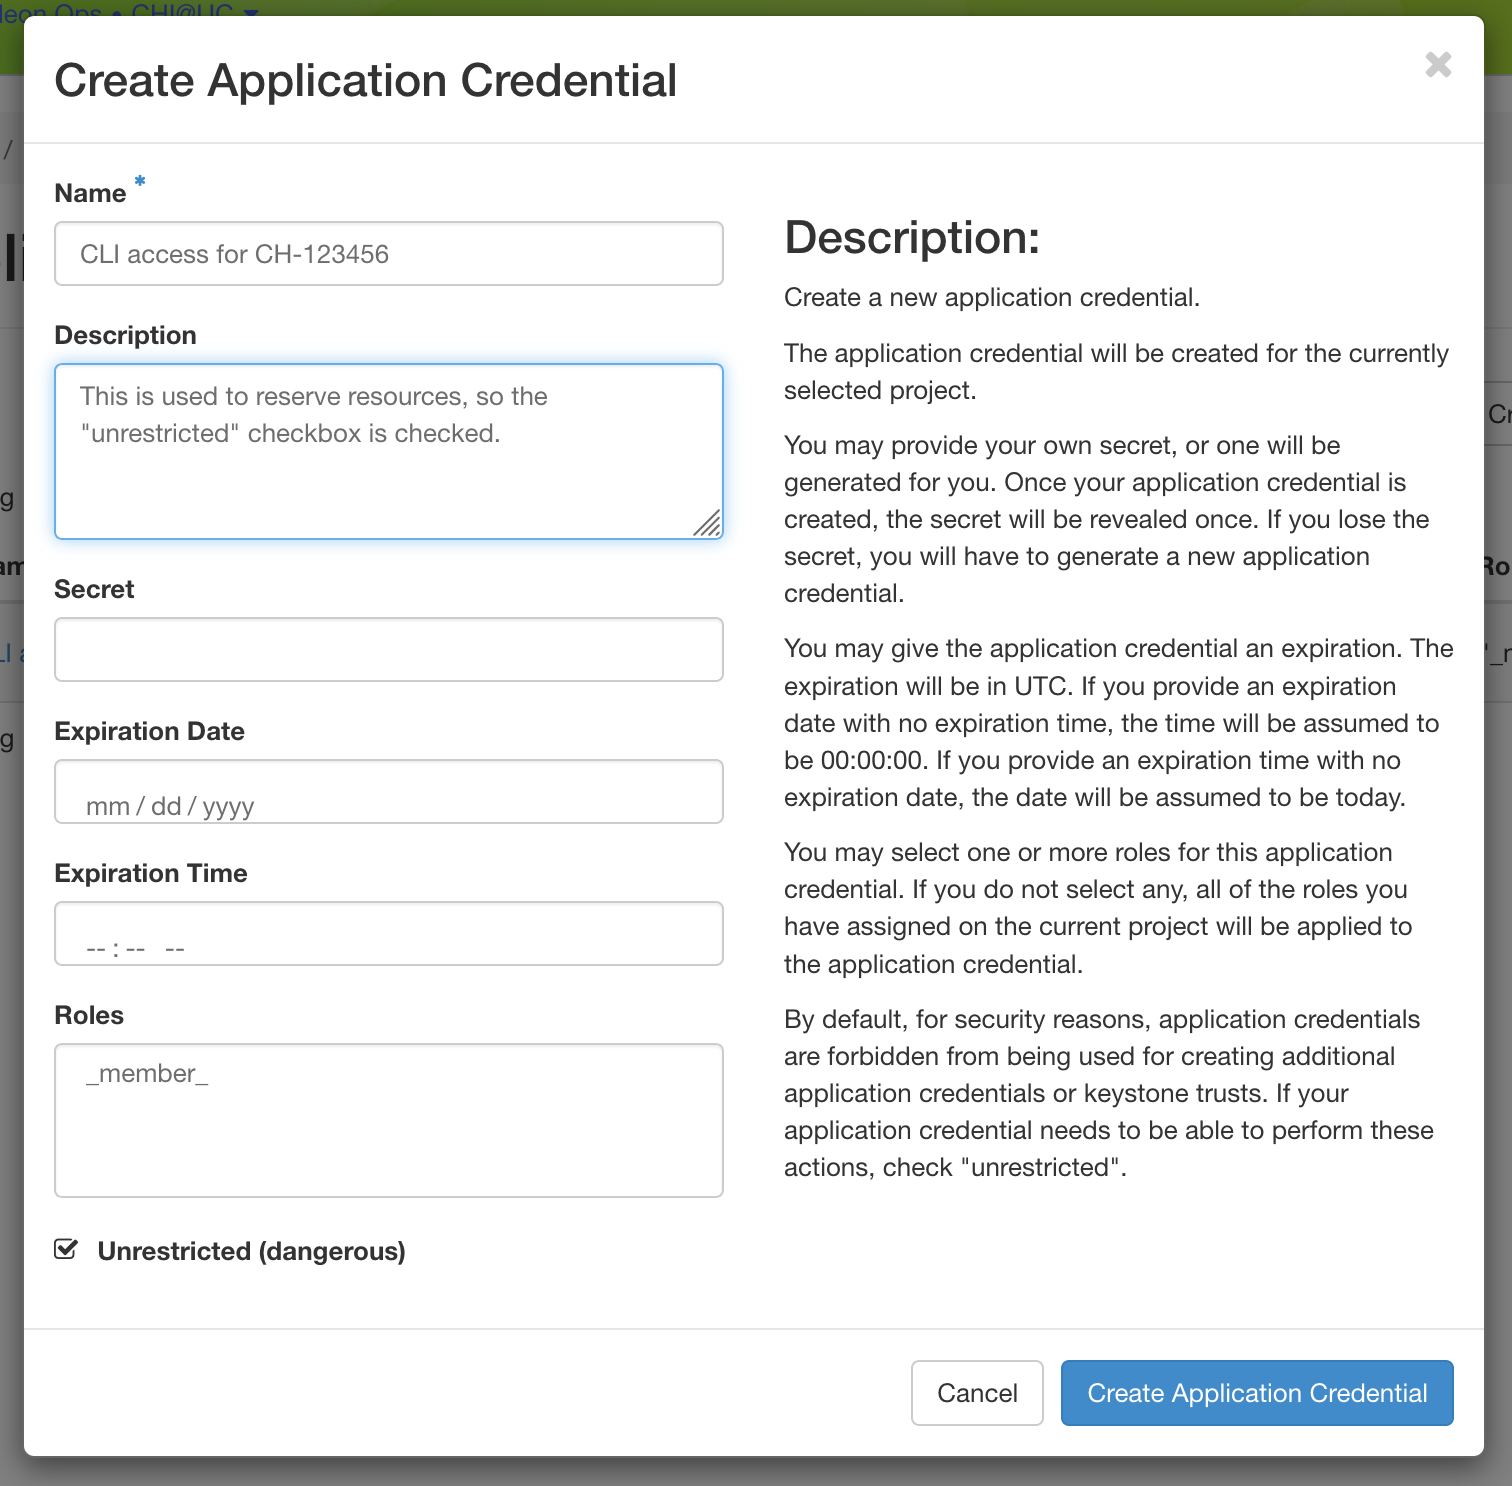 Creating an application credential via the GUI